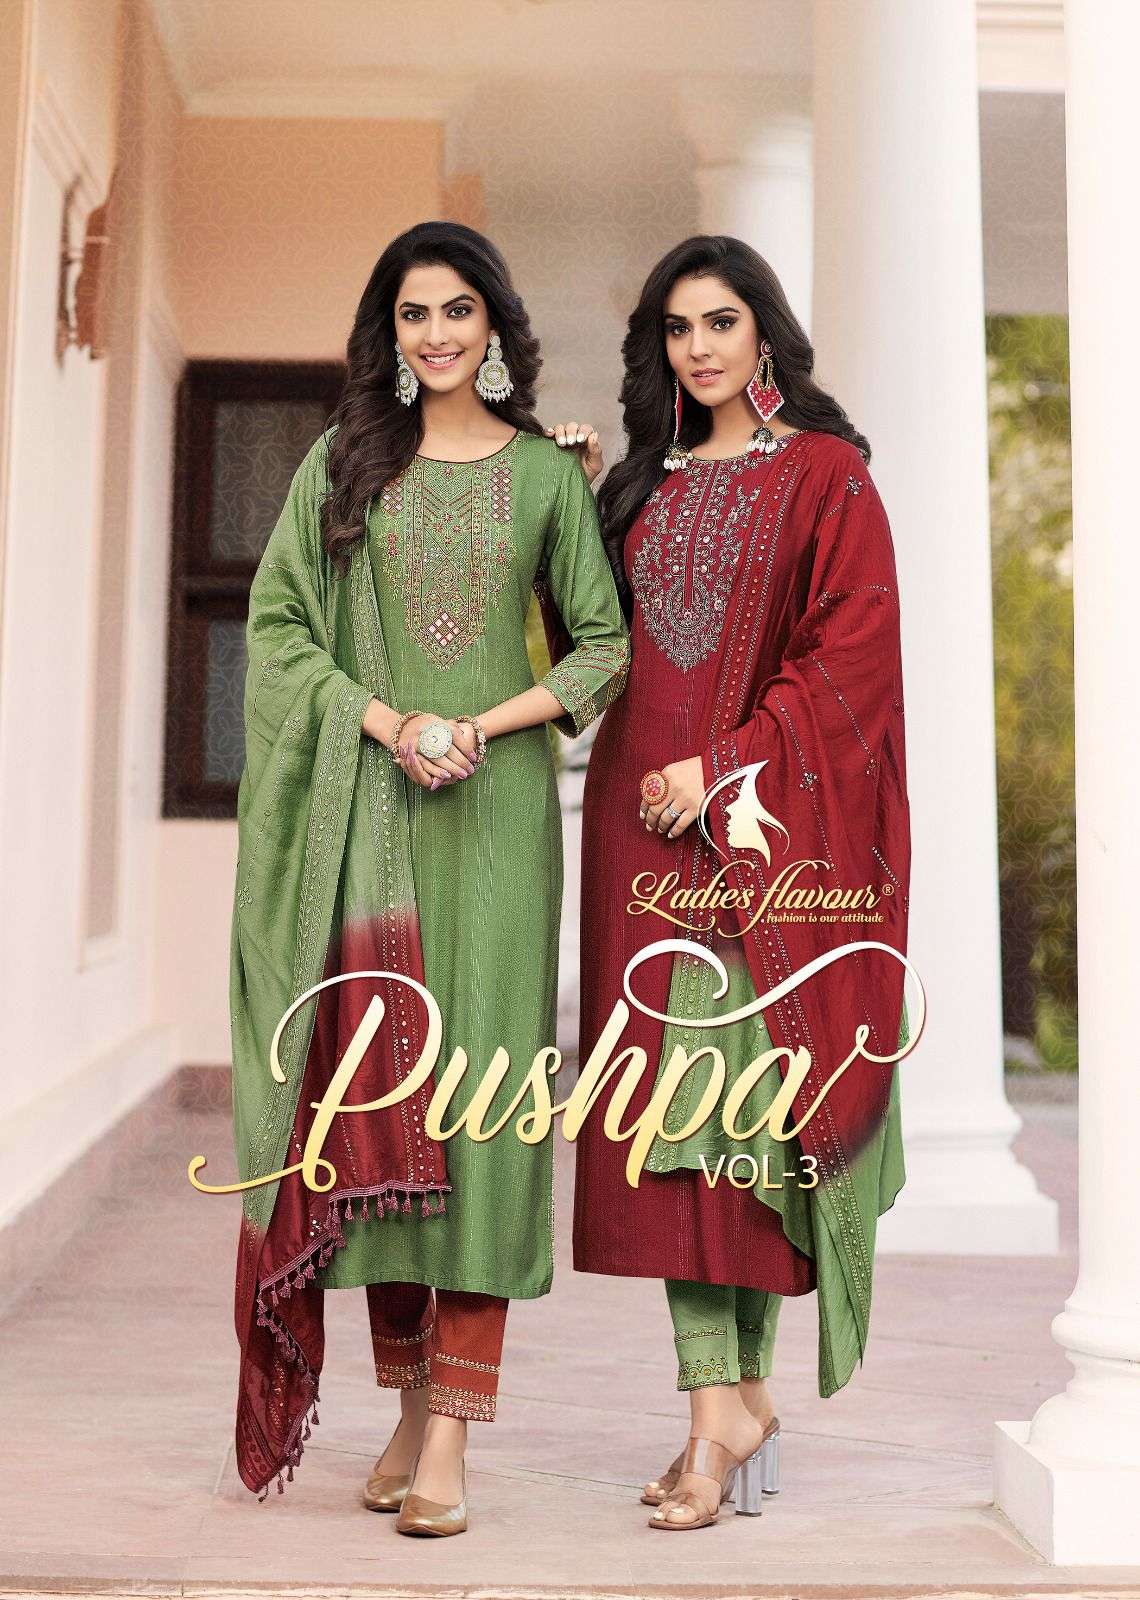 LADIES FLAVOUR PUSHPA VOL 3 PURE RAYON VISCOSE READYMADE SUI...